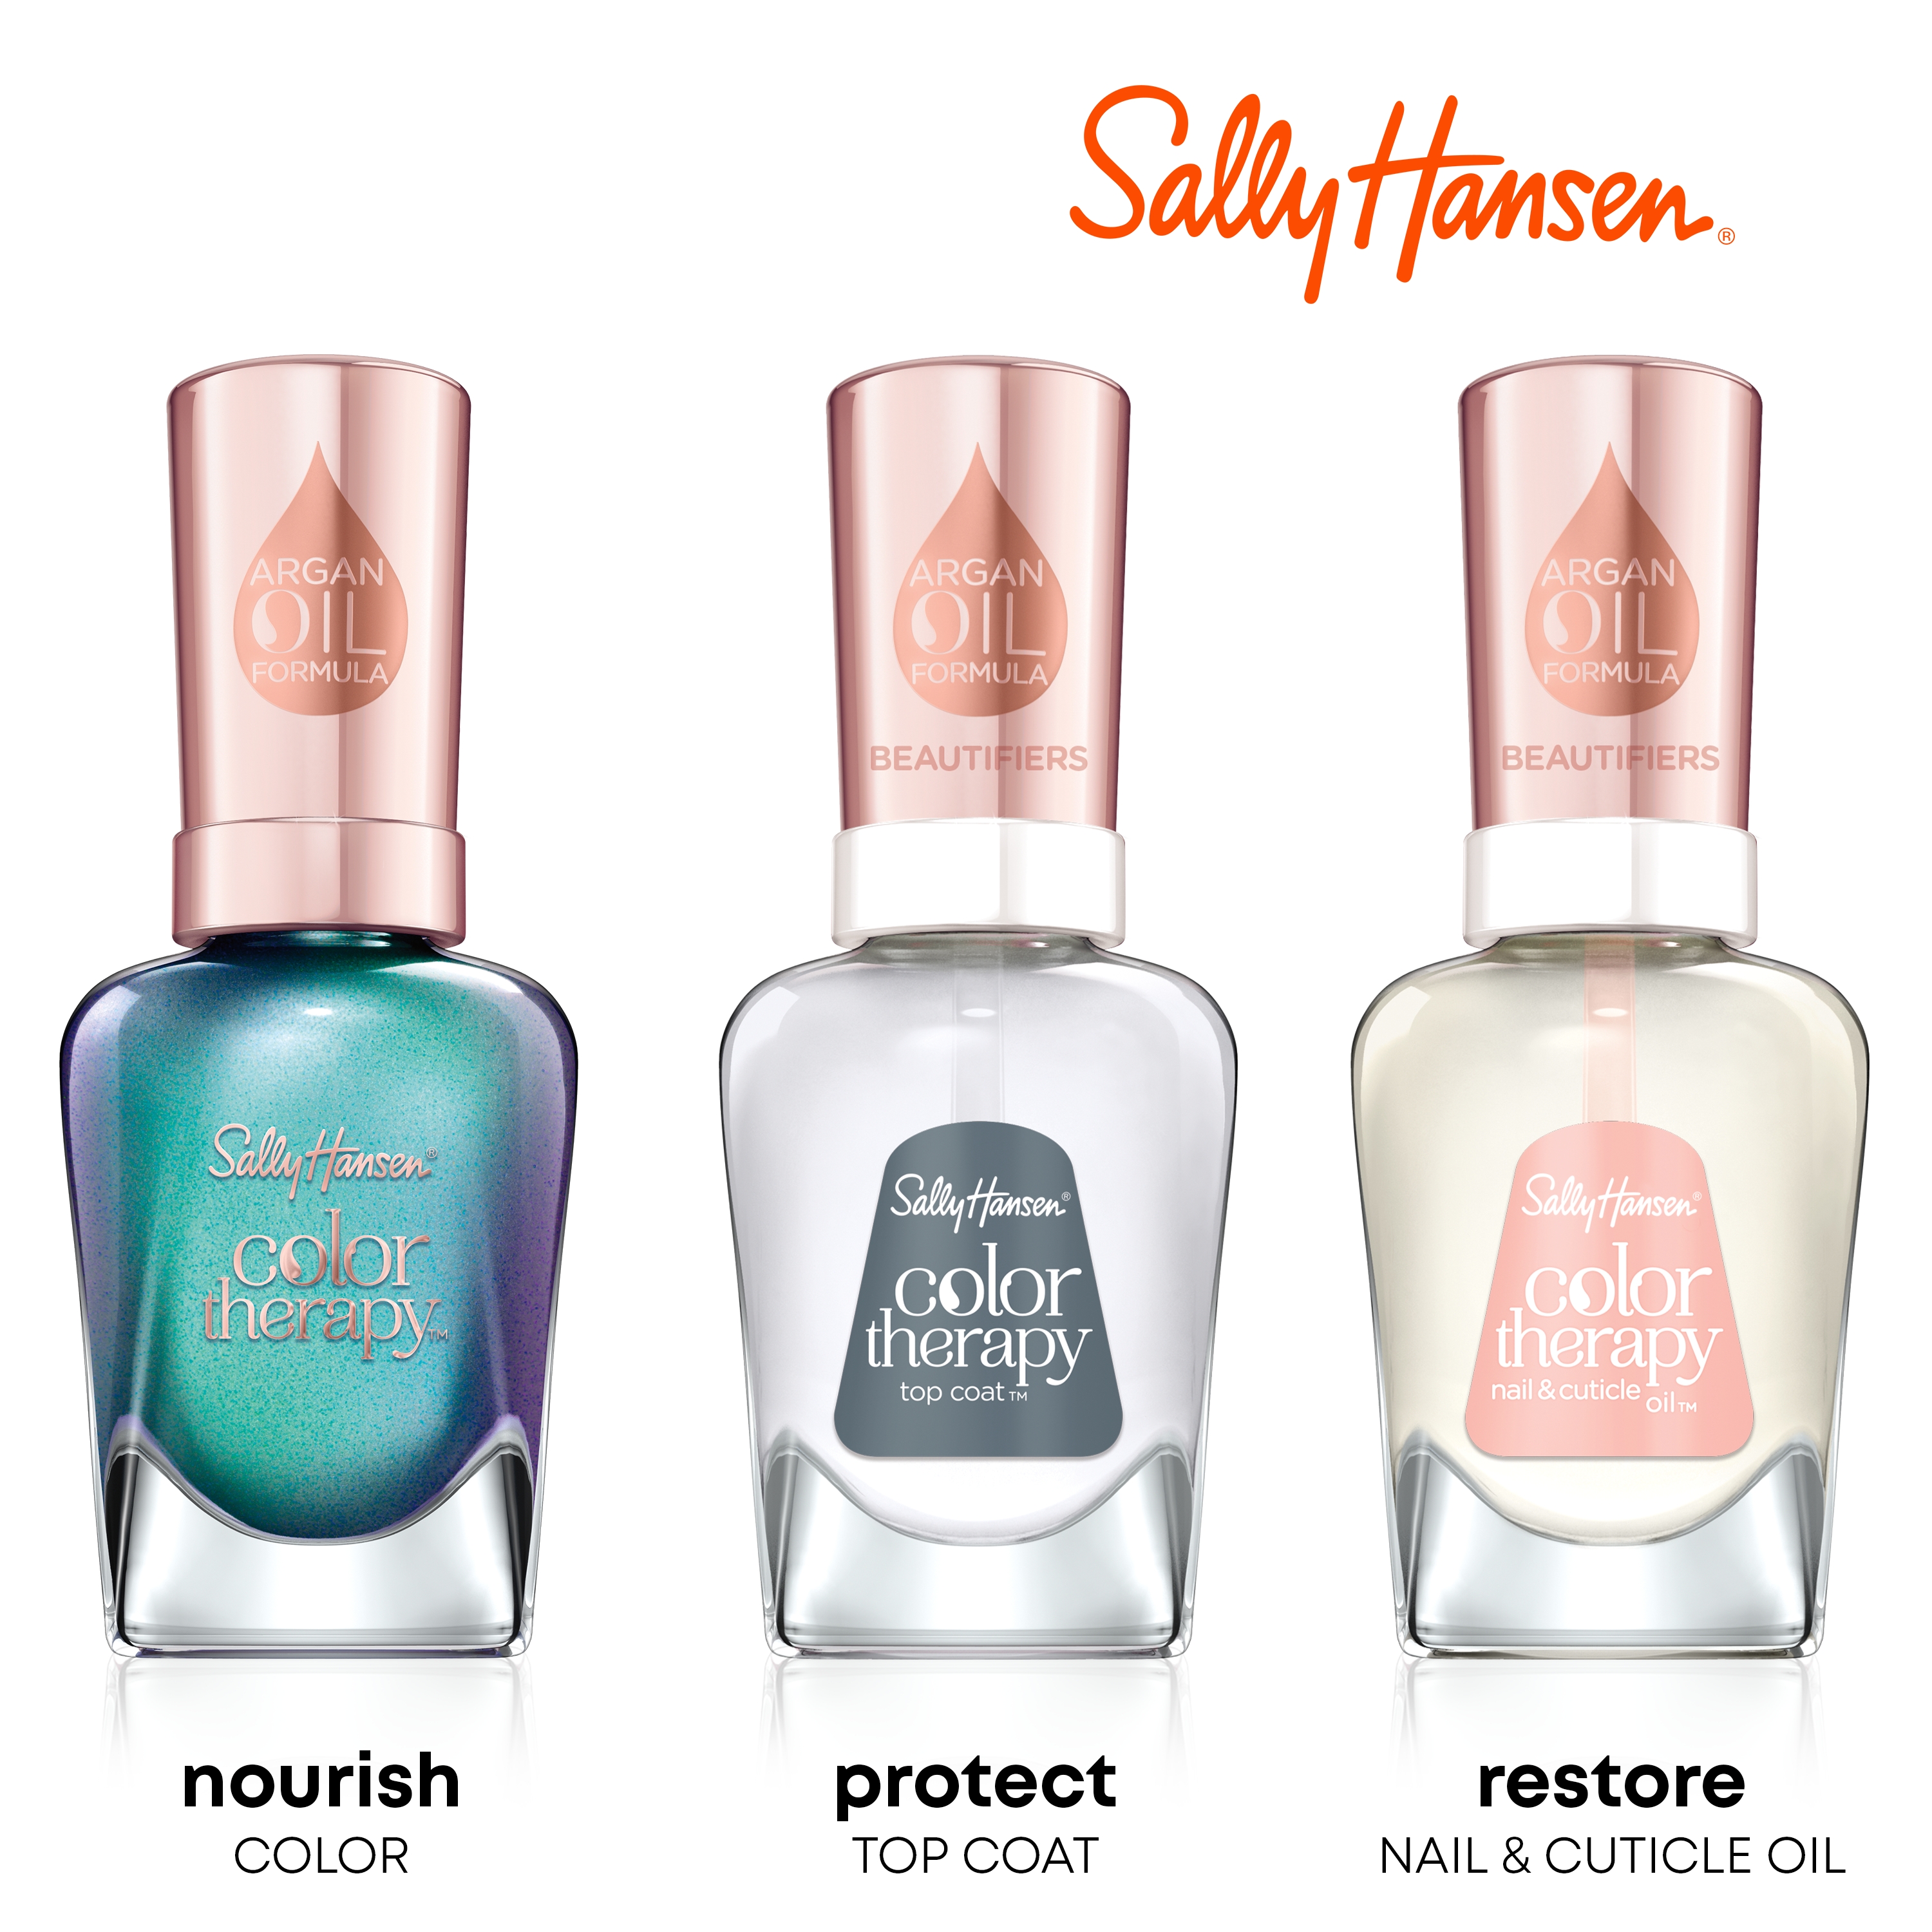 Sally Hansen Color Therapy Nail Color, Savasan-ahhh, 0.5 oz, Color Nail Polish, Nail Polish, Nail Polish Colors, Restorative, Argan Oil Formula, Instantly Moisturizes - image 5 of 14